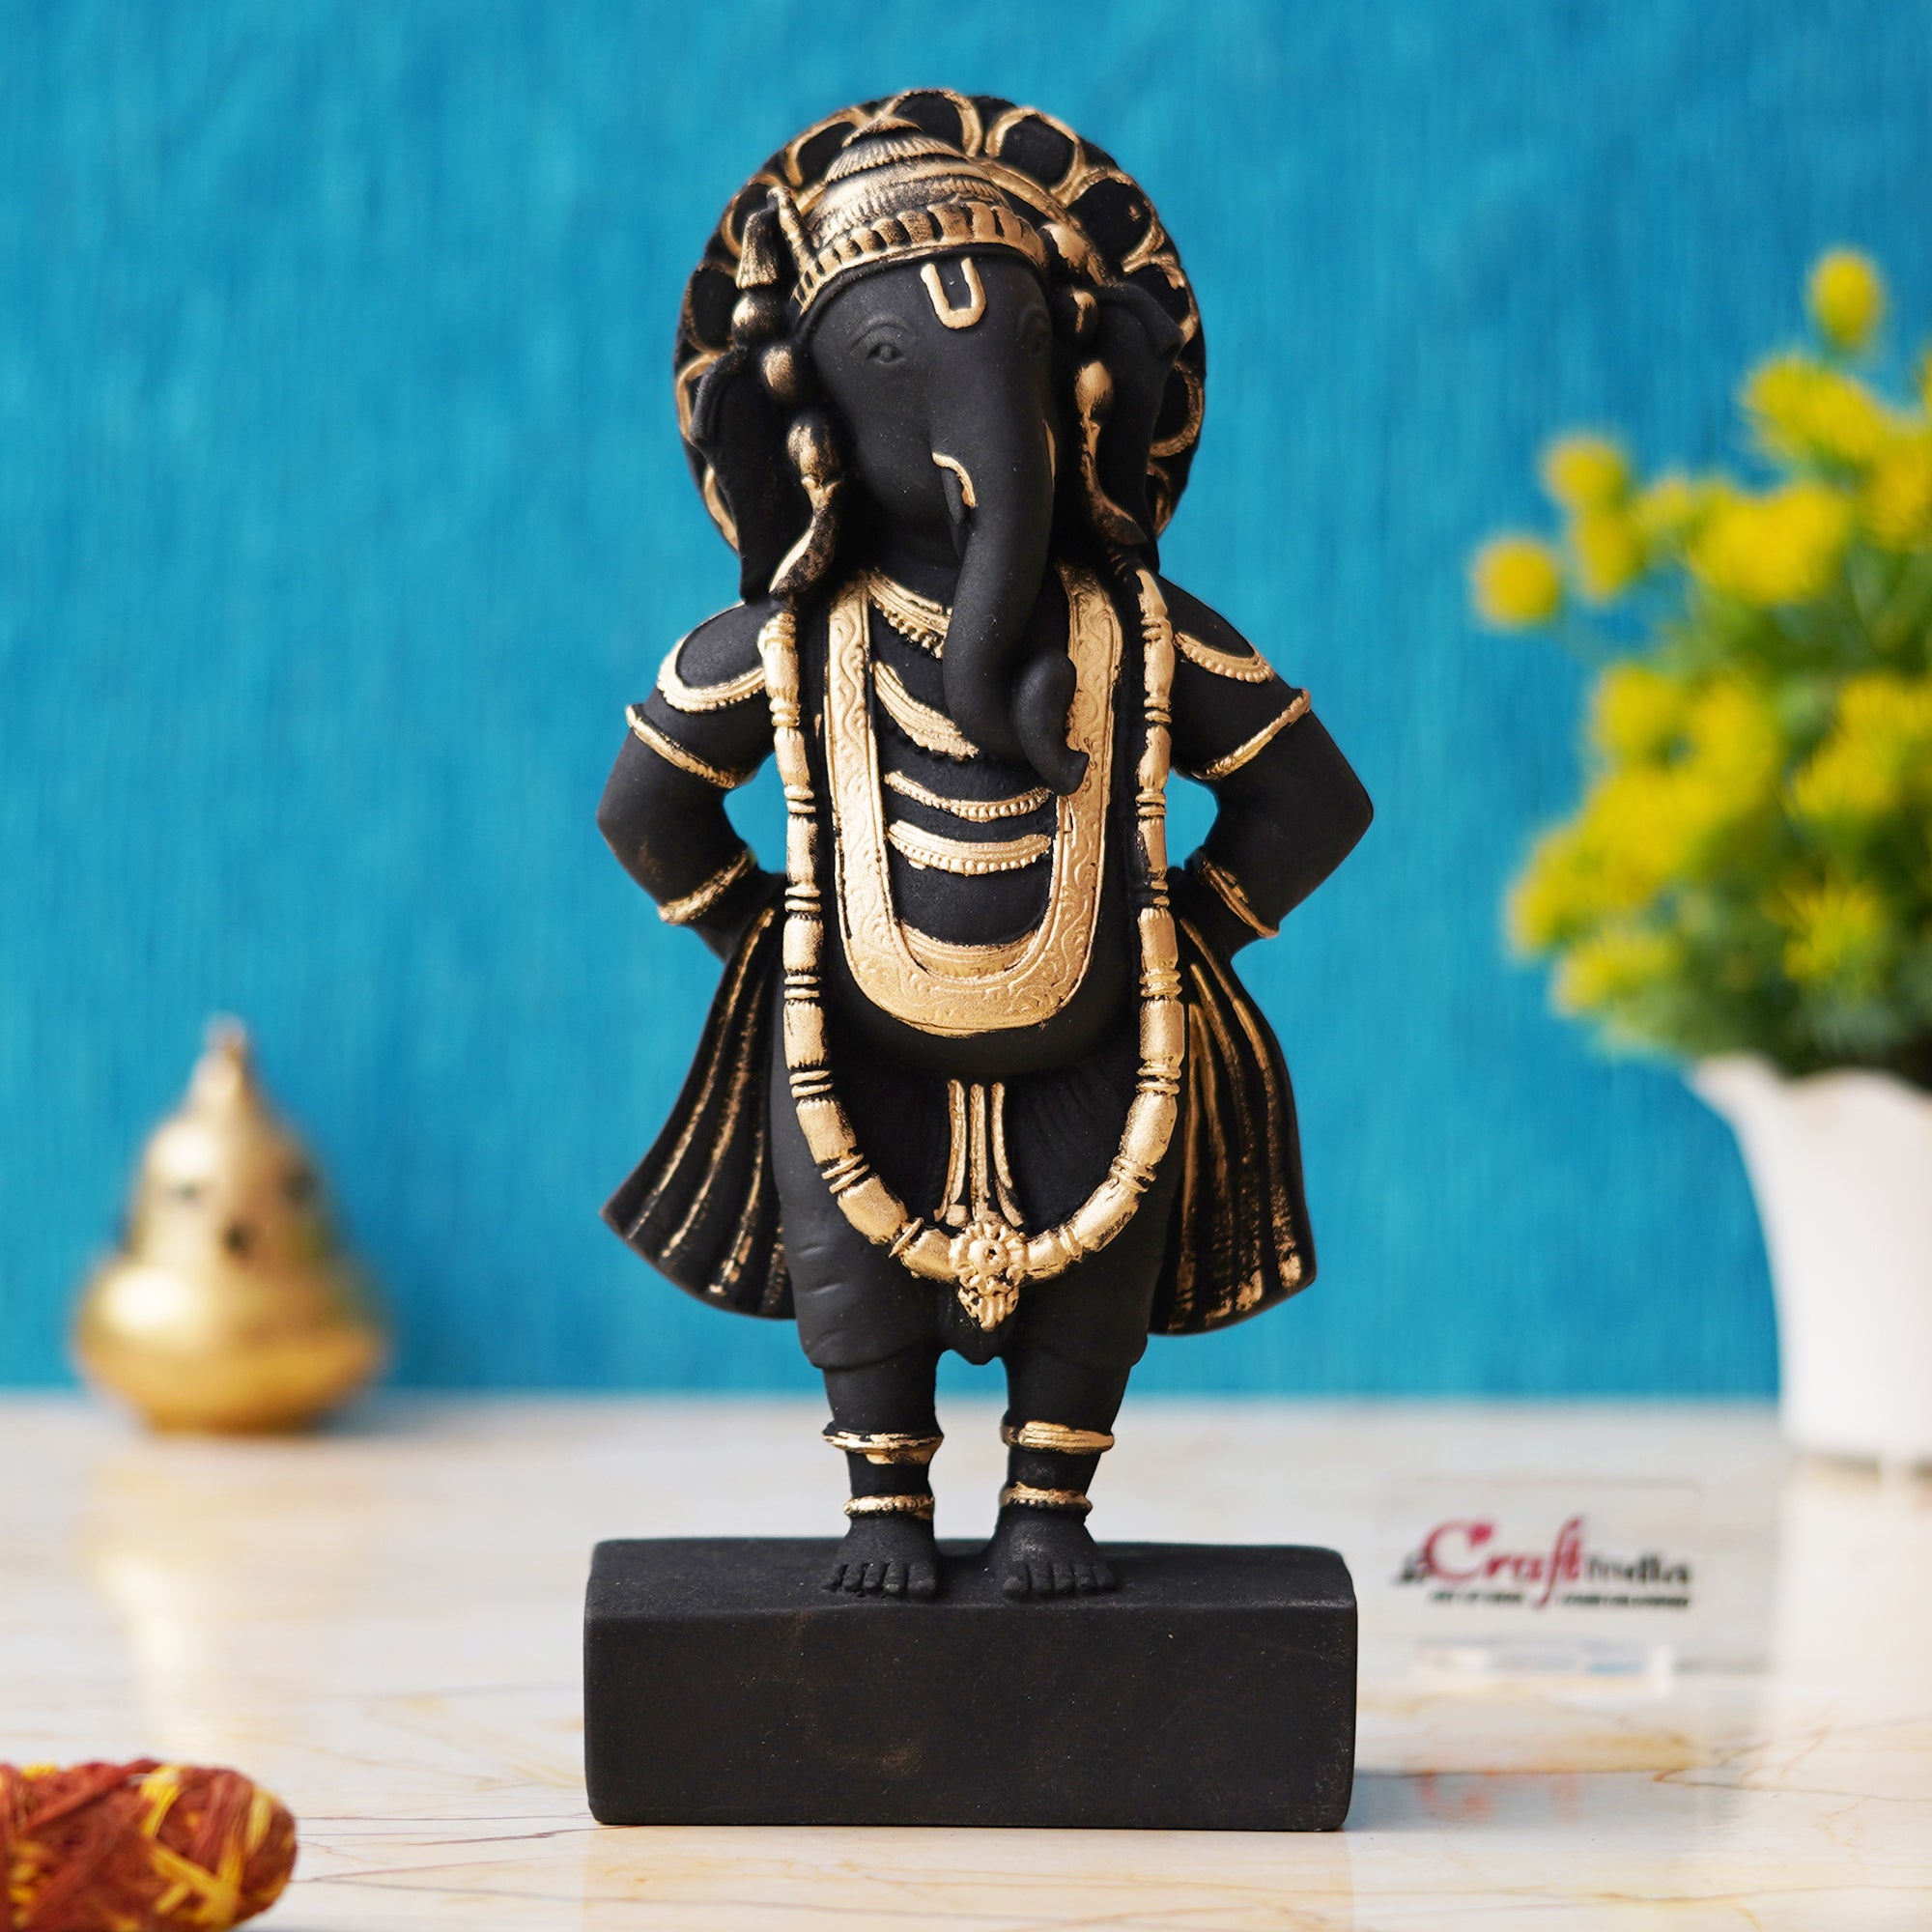 Black & Golden Polyresin Handcrafted Standing Lord Ganesha Statue